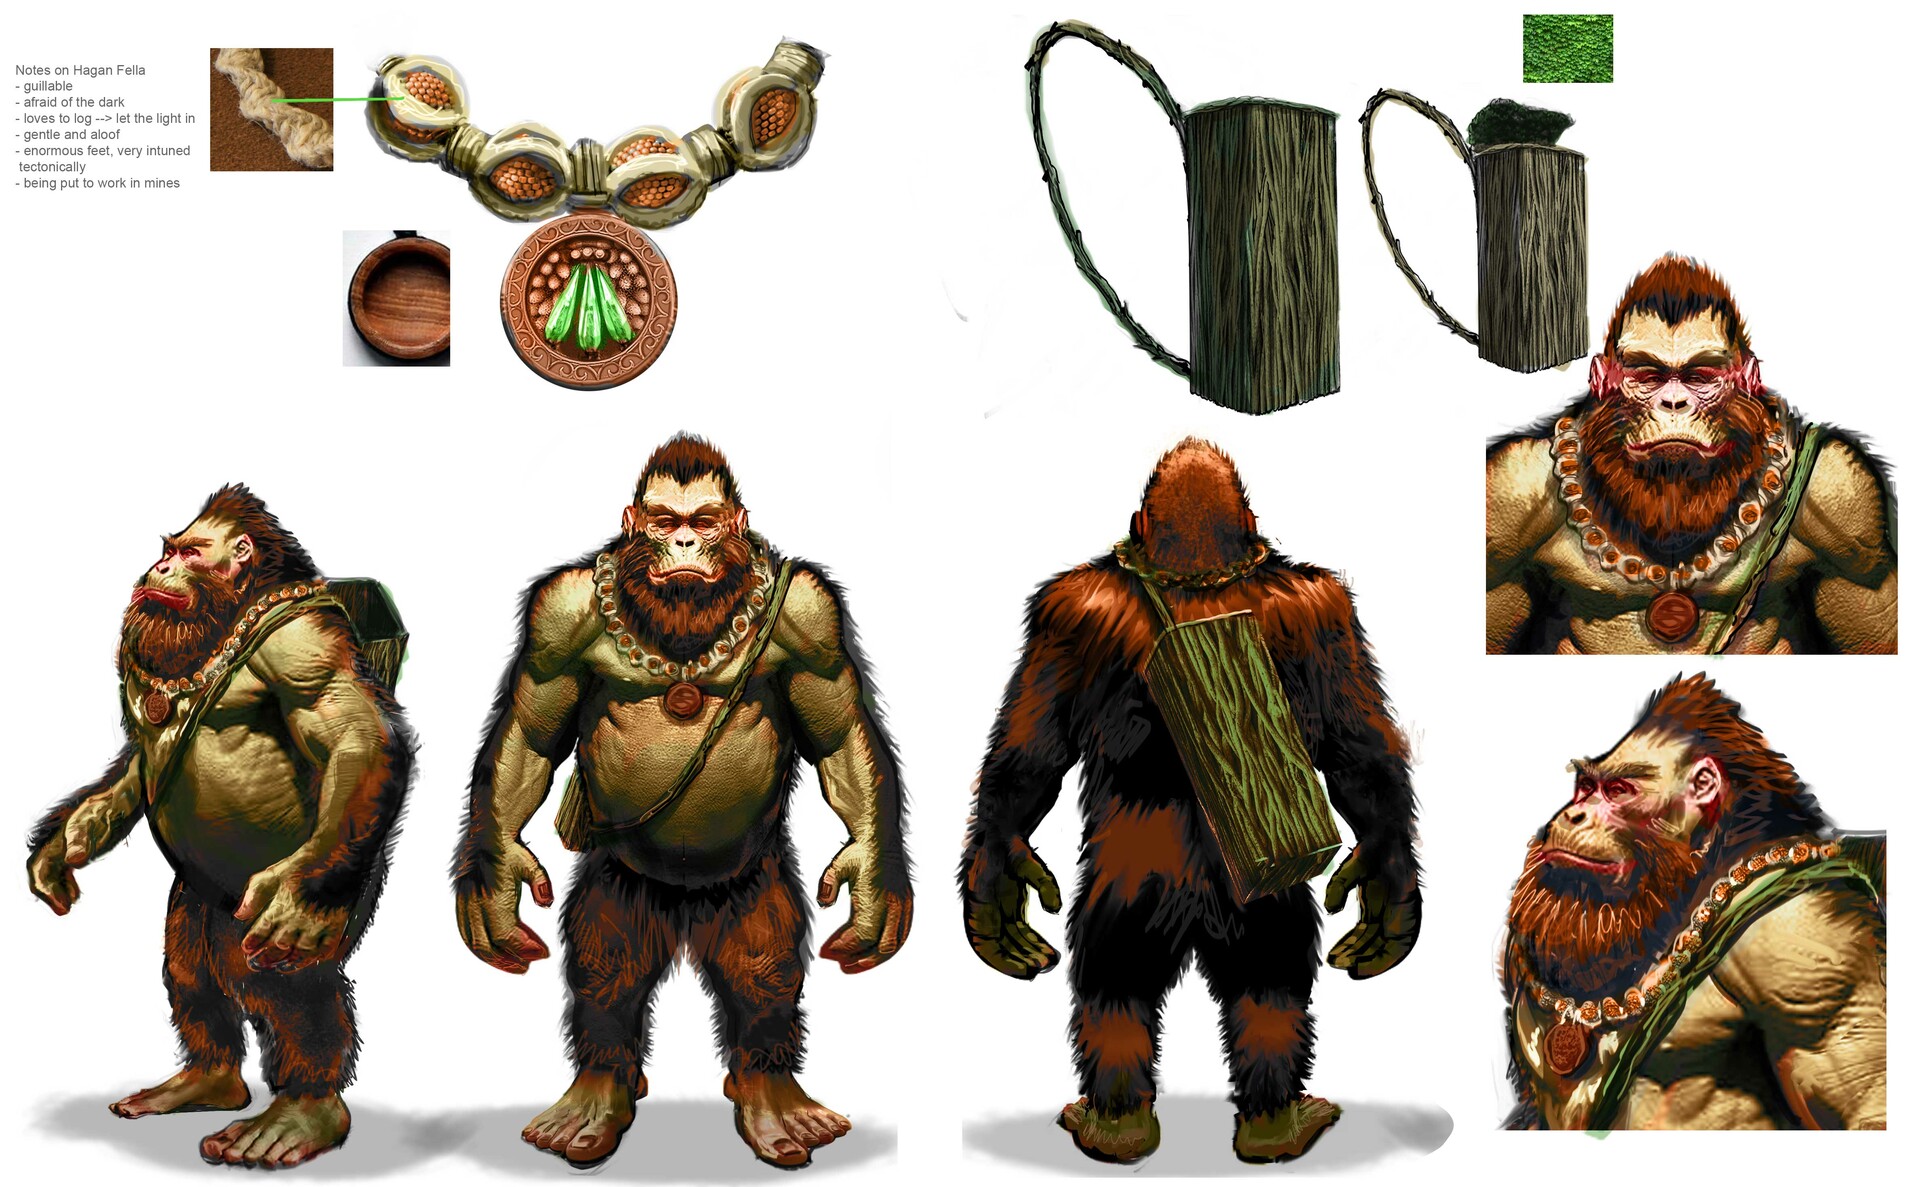 ArtStation - Choose your favorite choice for the Gorilla in our video game.